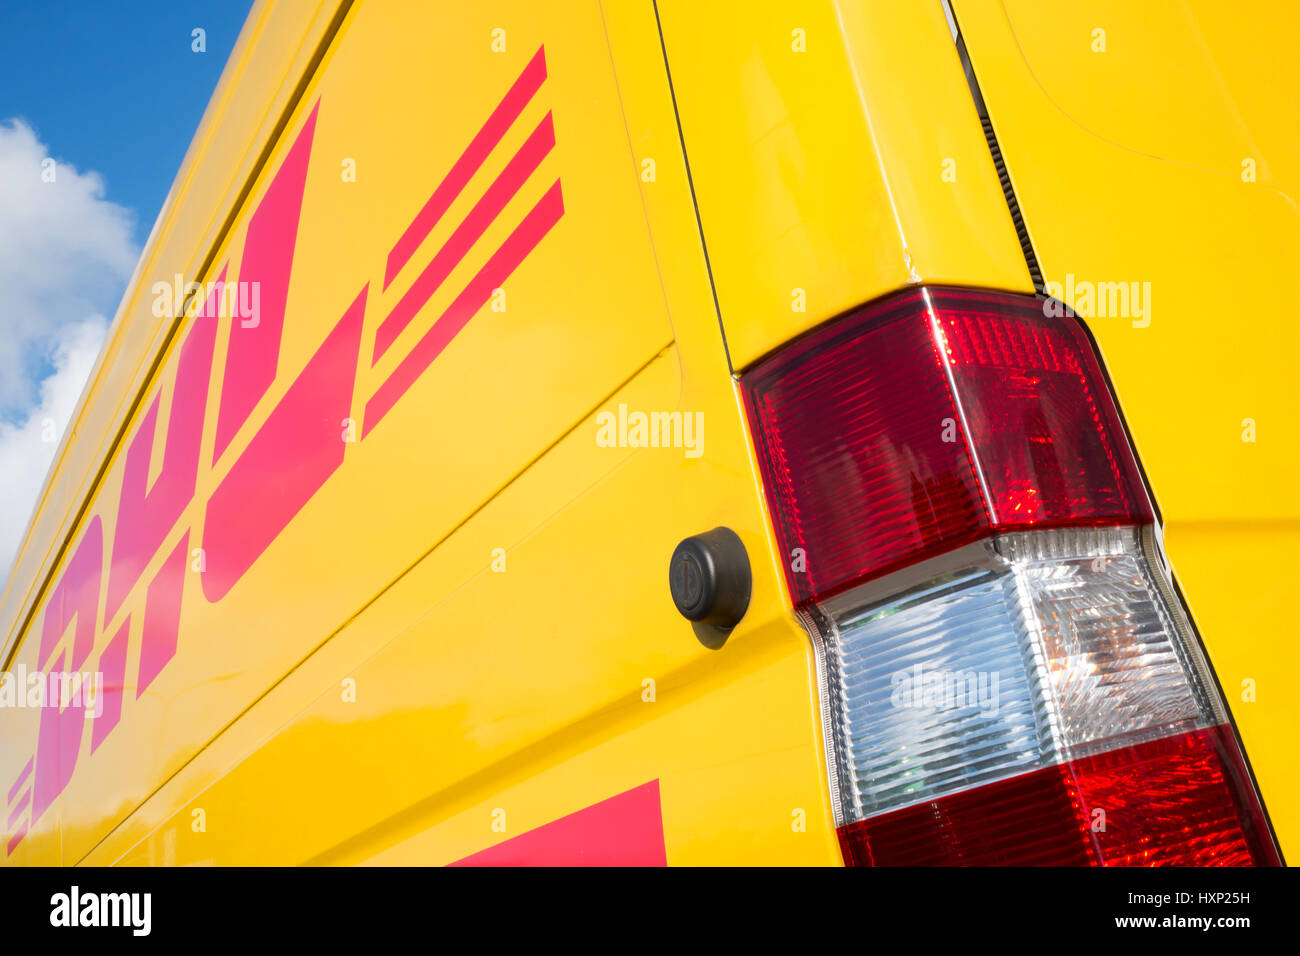 Side panel of a DHL delivery van. DHL is a division of the German logistics company Deutsche Post AG providing international express mail services. Stock Photo